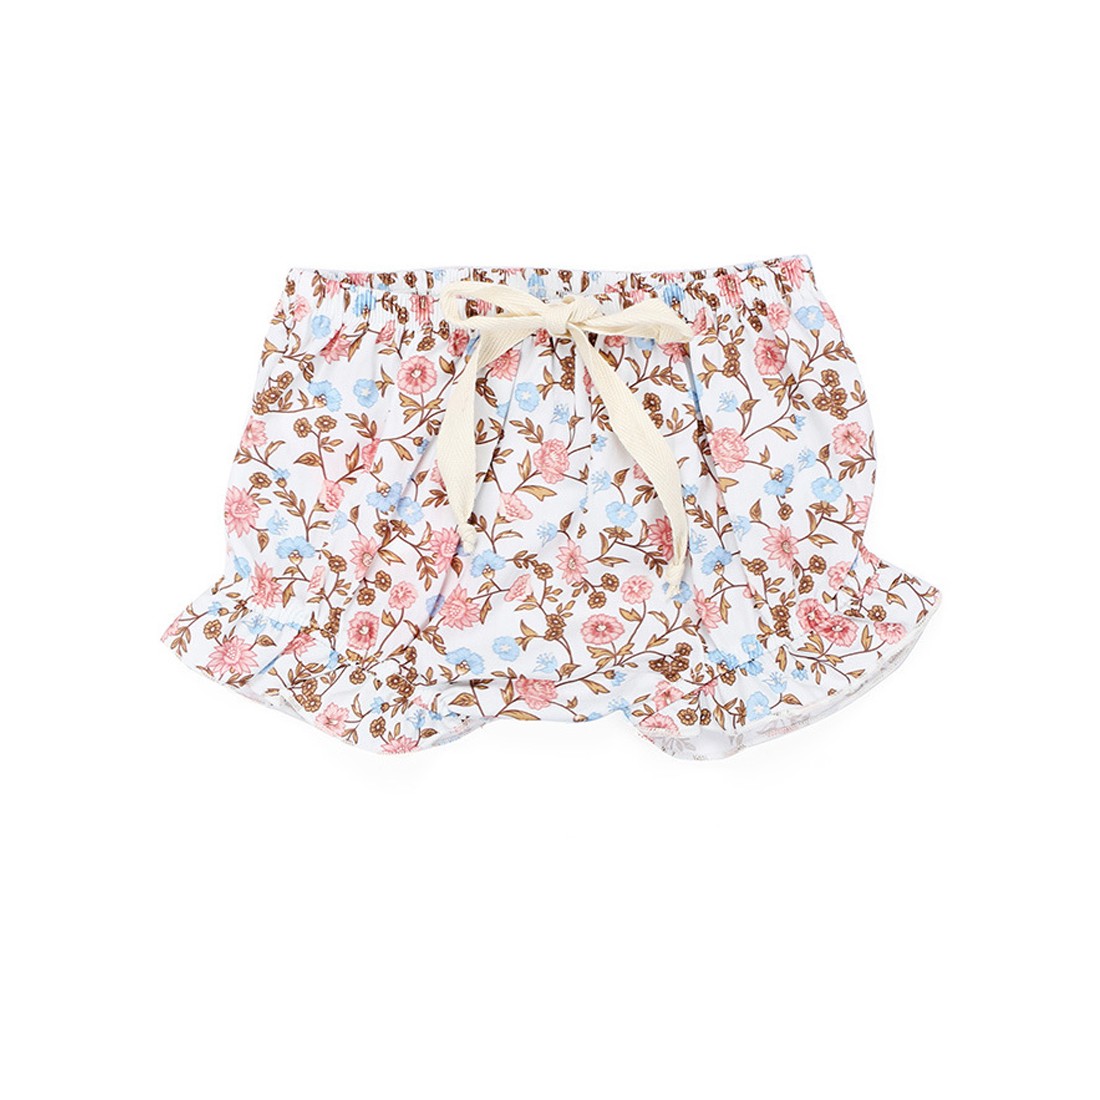 Gracie - White Floral Luxury Baby Bloomers